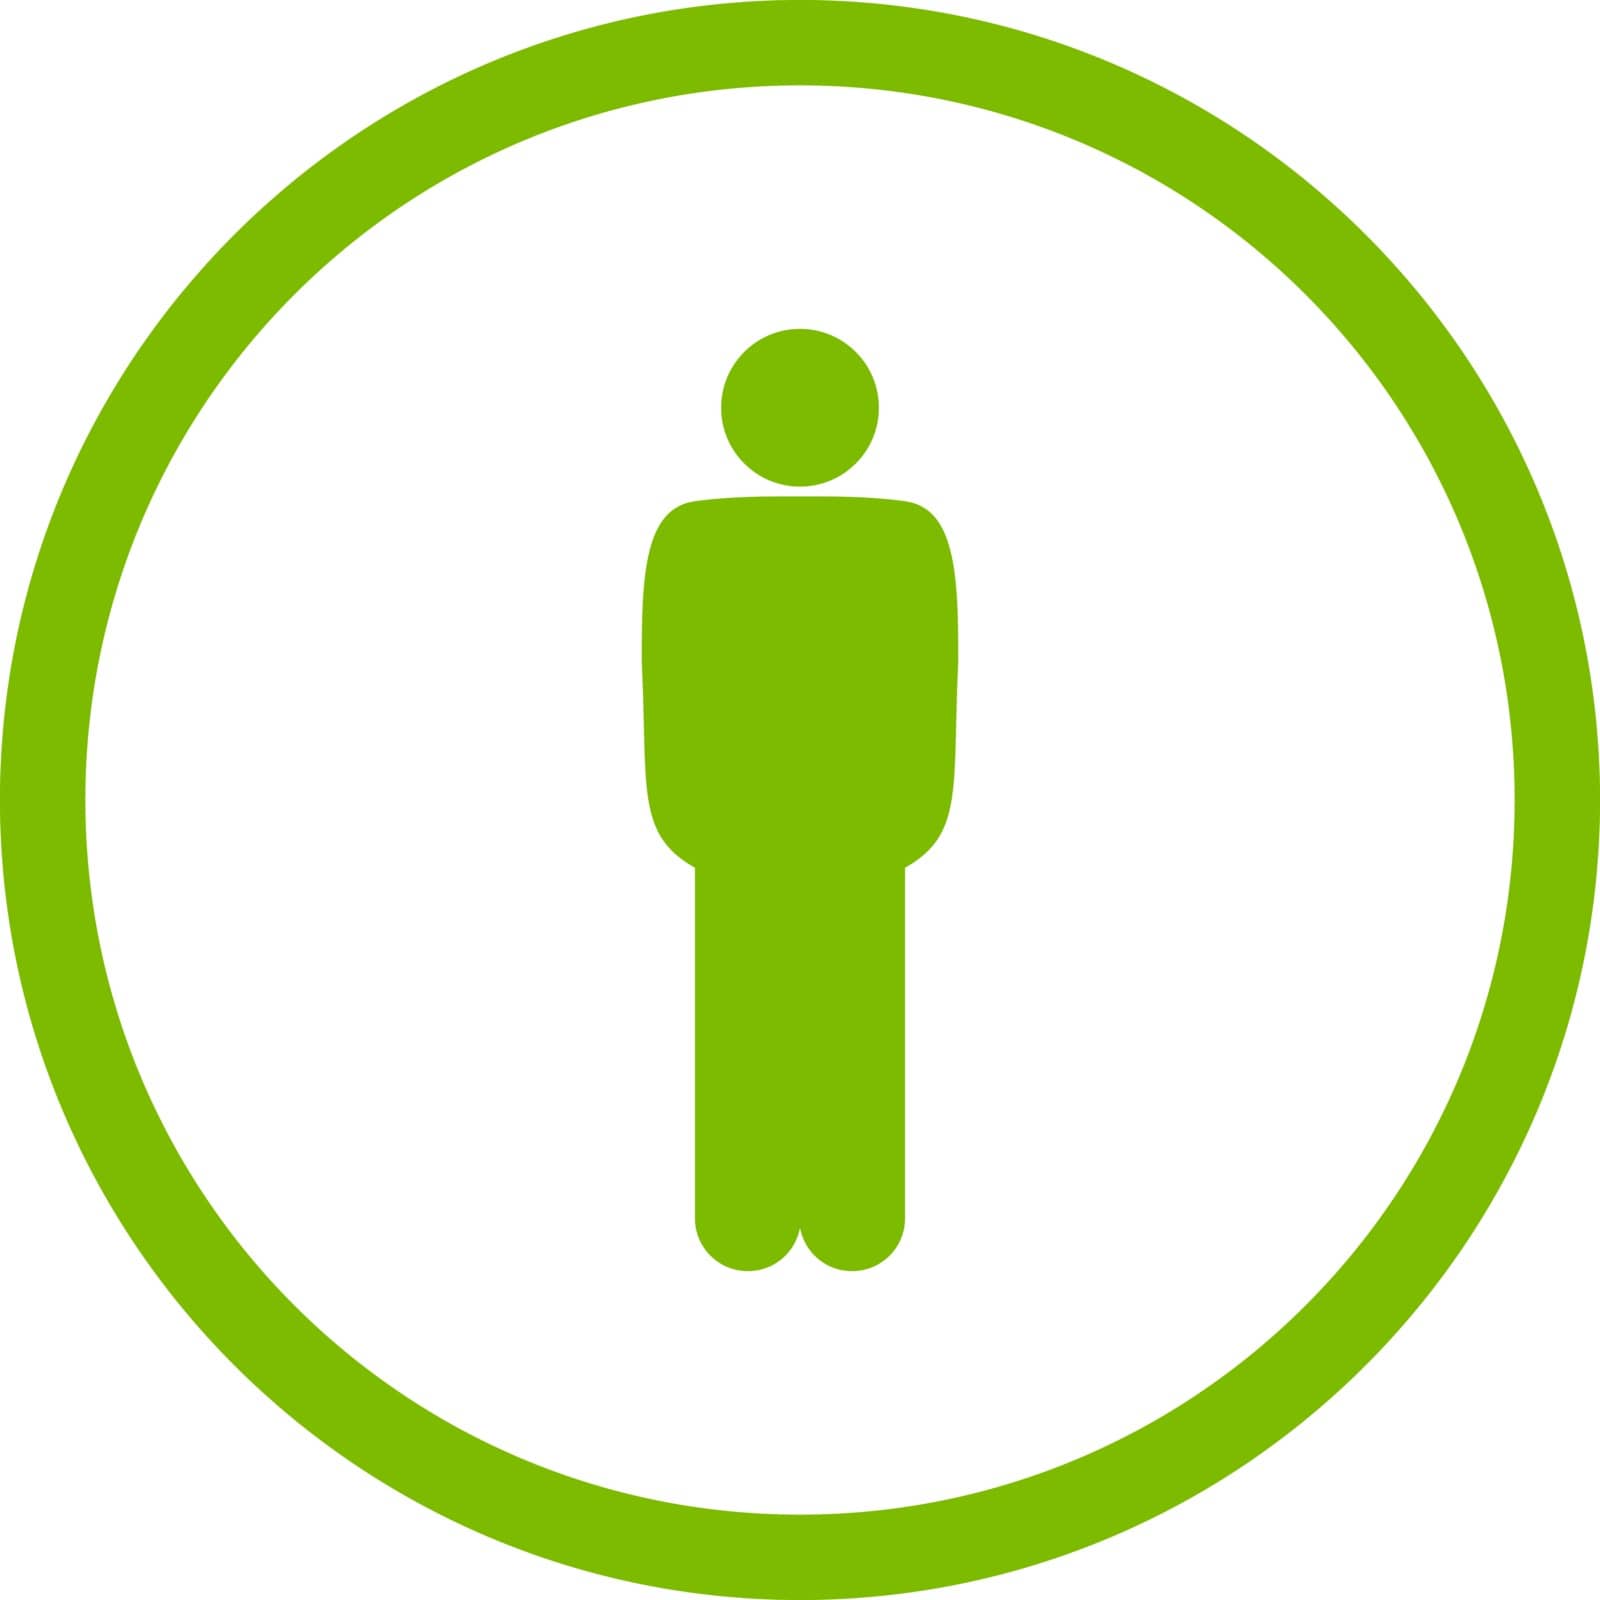 Standing vector icon. This rounded flat symbol is drawn with eco green color on a white background.